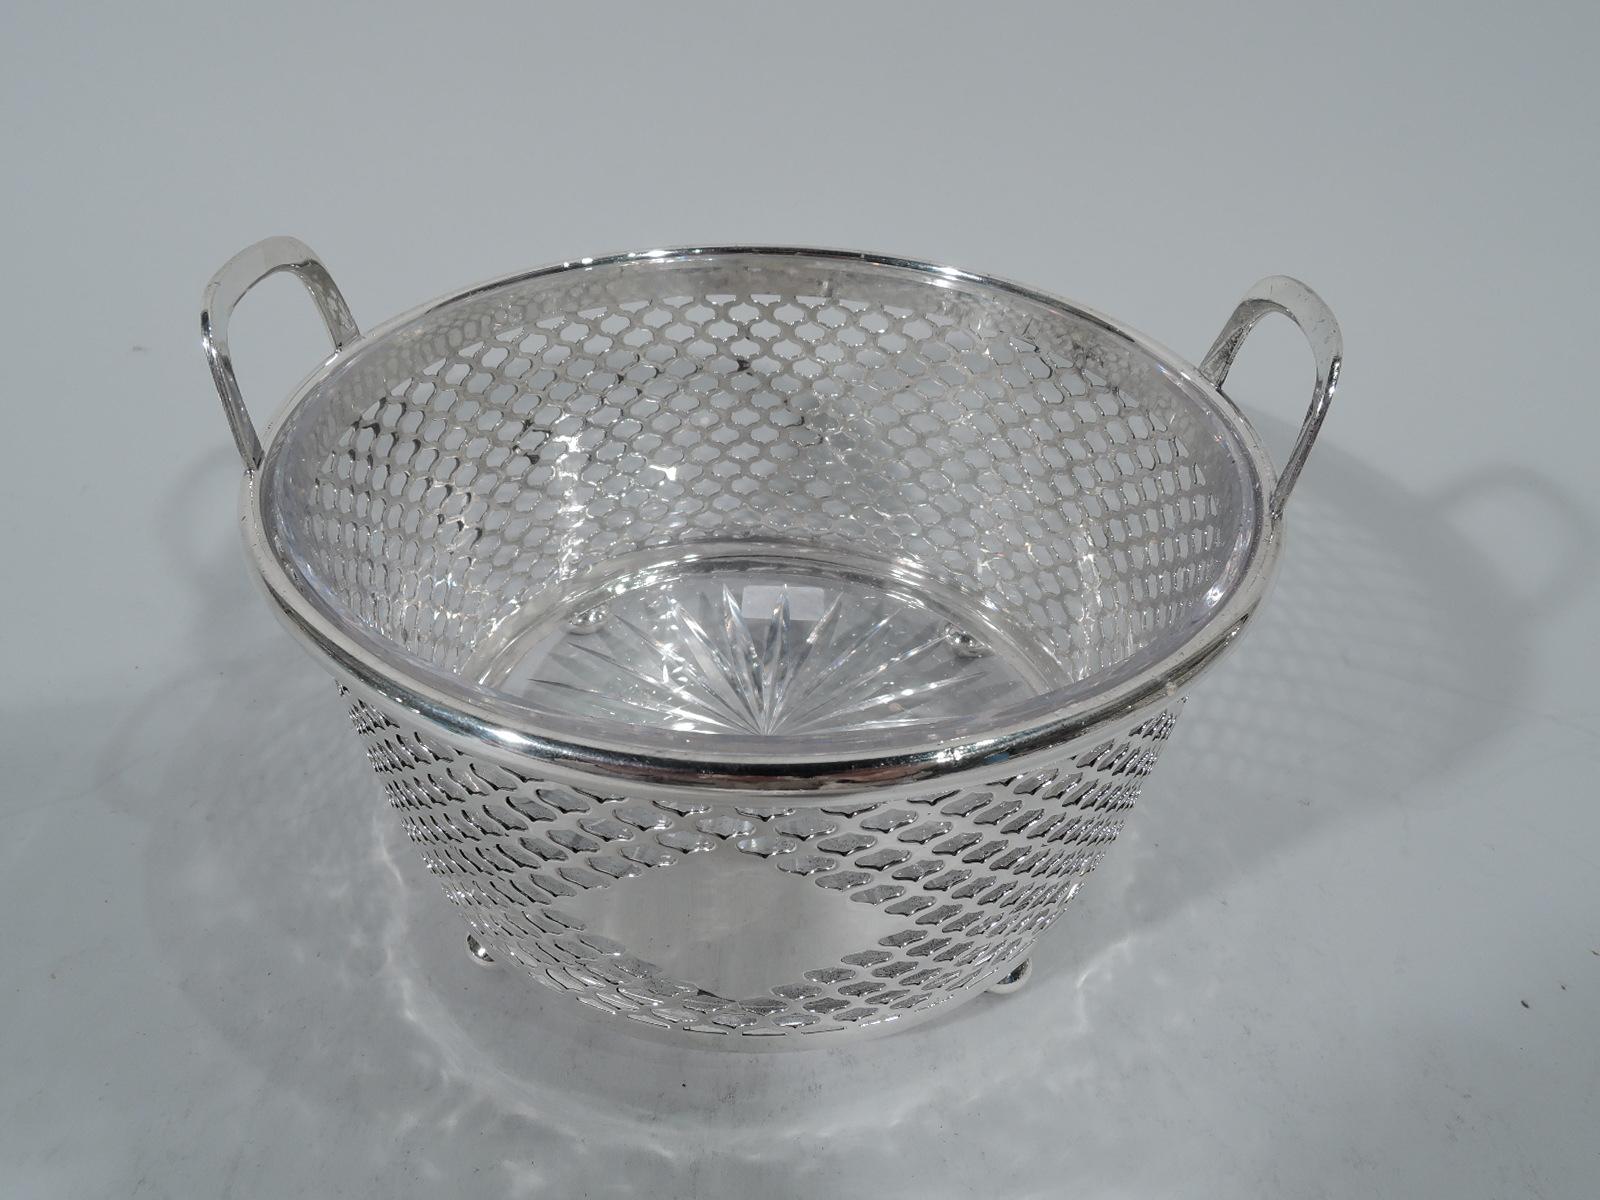 Edwardian sterling silver ice bucket. Made by Tiffany & Co. in New York. Straight and tapering sides with open bottom, four squashed ball supports, and two bracket handles mounted to rim. Sides have web-style piercing. Lozenge-form cartouche